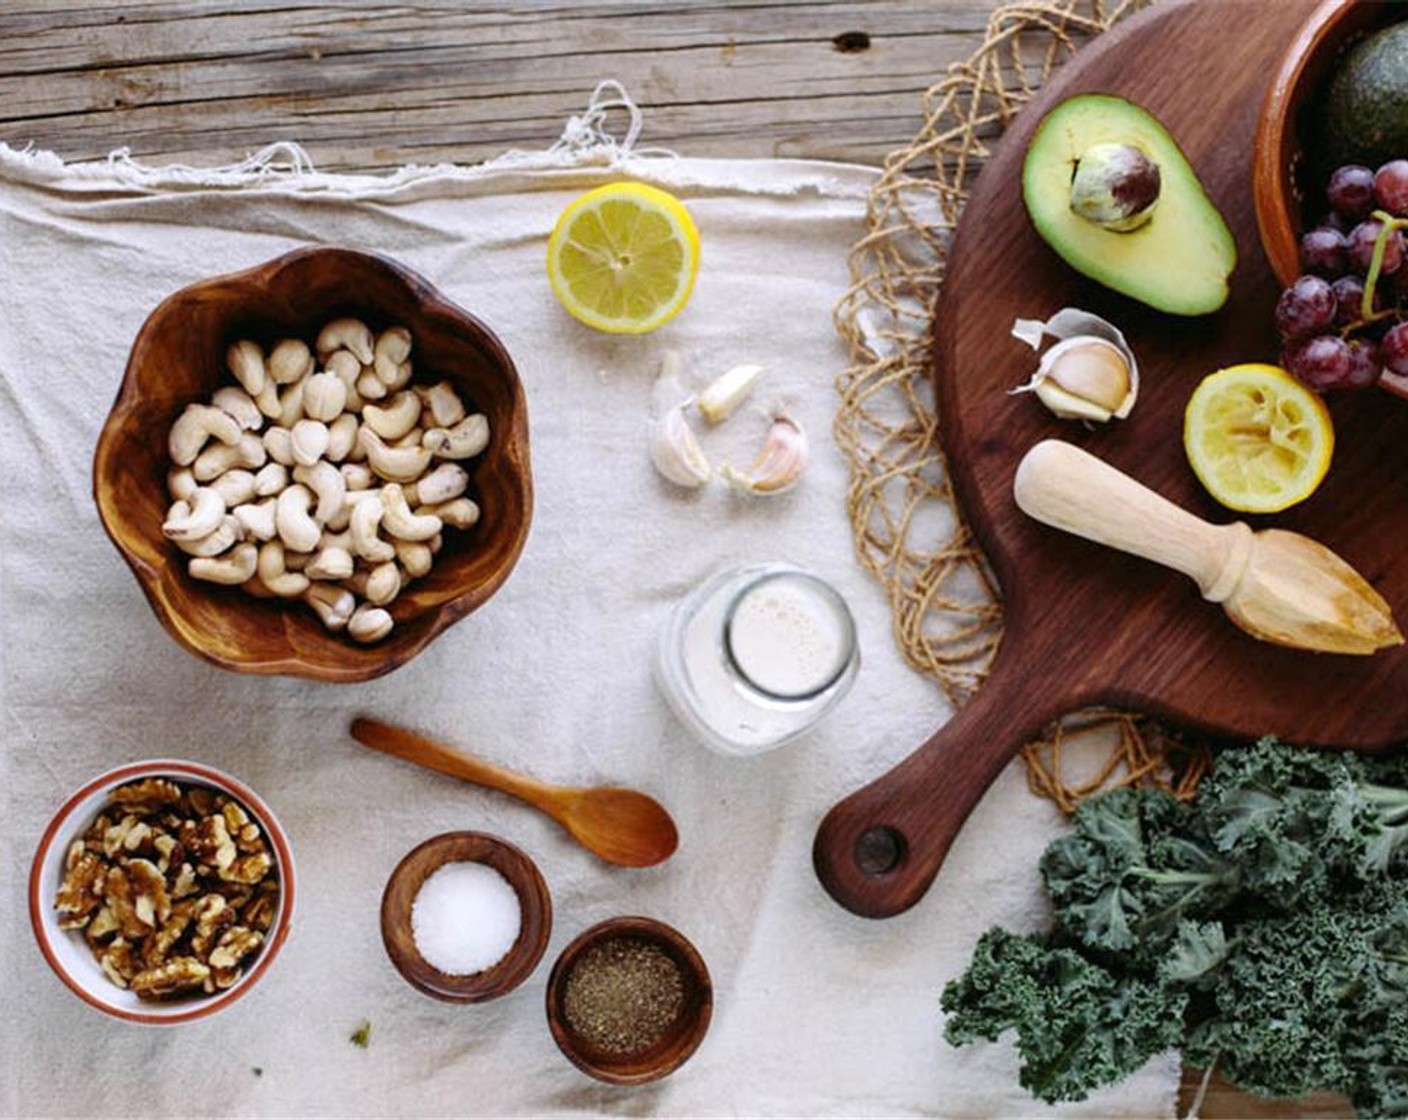 step 1 To make the cashew & avocado “mayo” dressing: Soak the Raw Cashews (1 cup) in a bowl of water overnight.